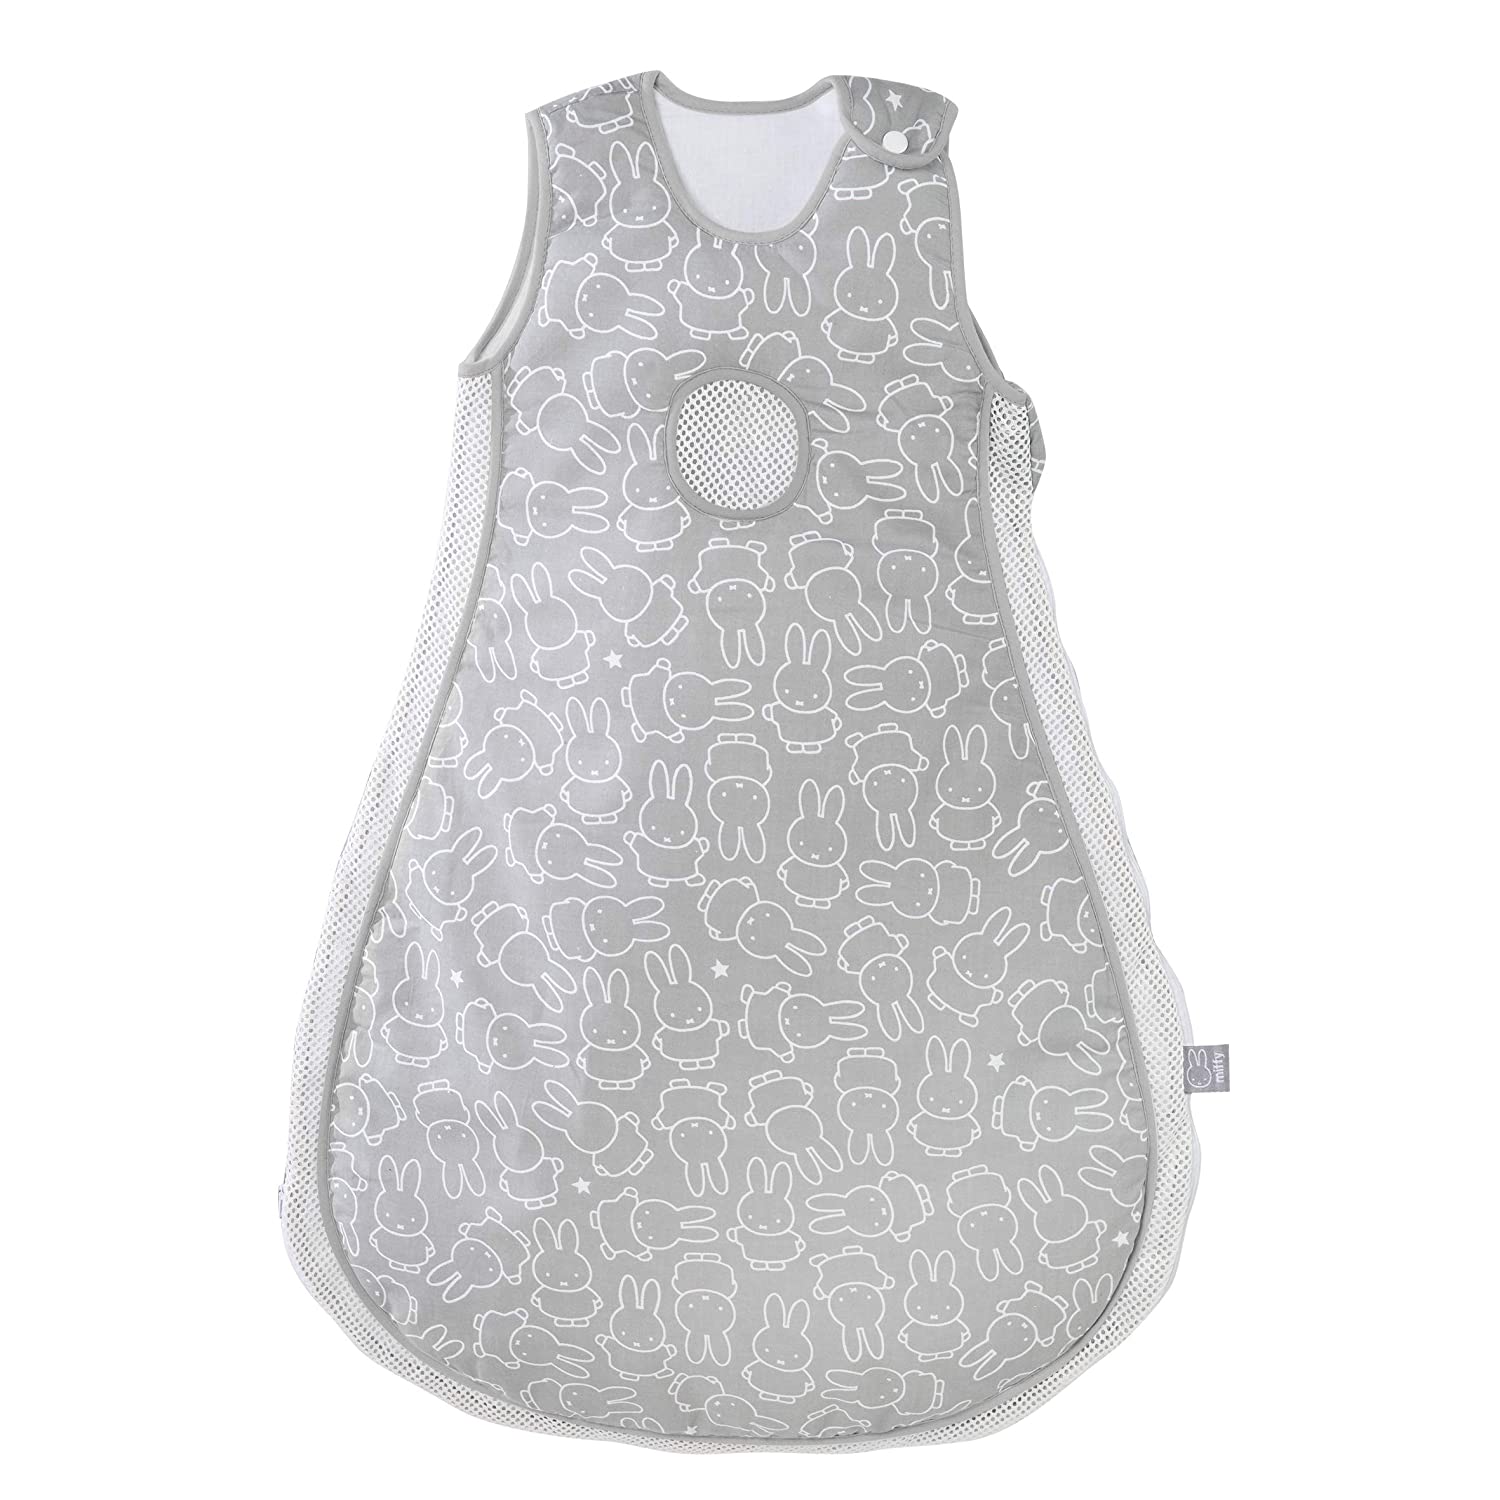 Roba Safe Asleep Easy Air Miffy Baby Sleeping Bag Size 56/62 cm 100% Cotton Woven Printed Soft Filling 100% Polyester Mesh Inserts Air Balance System